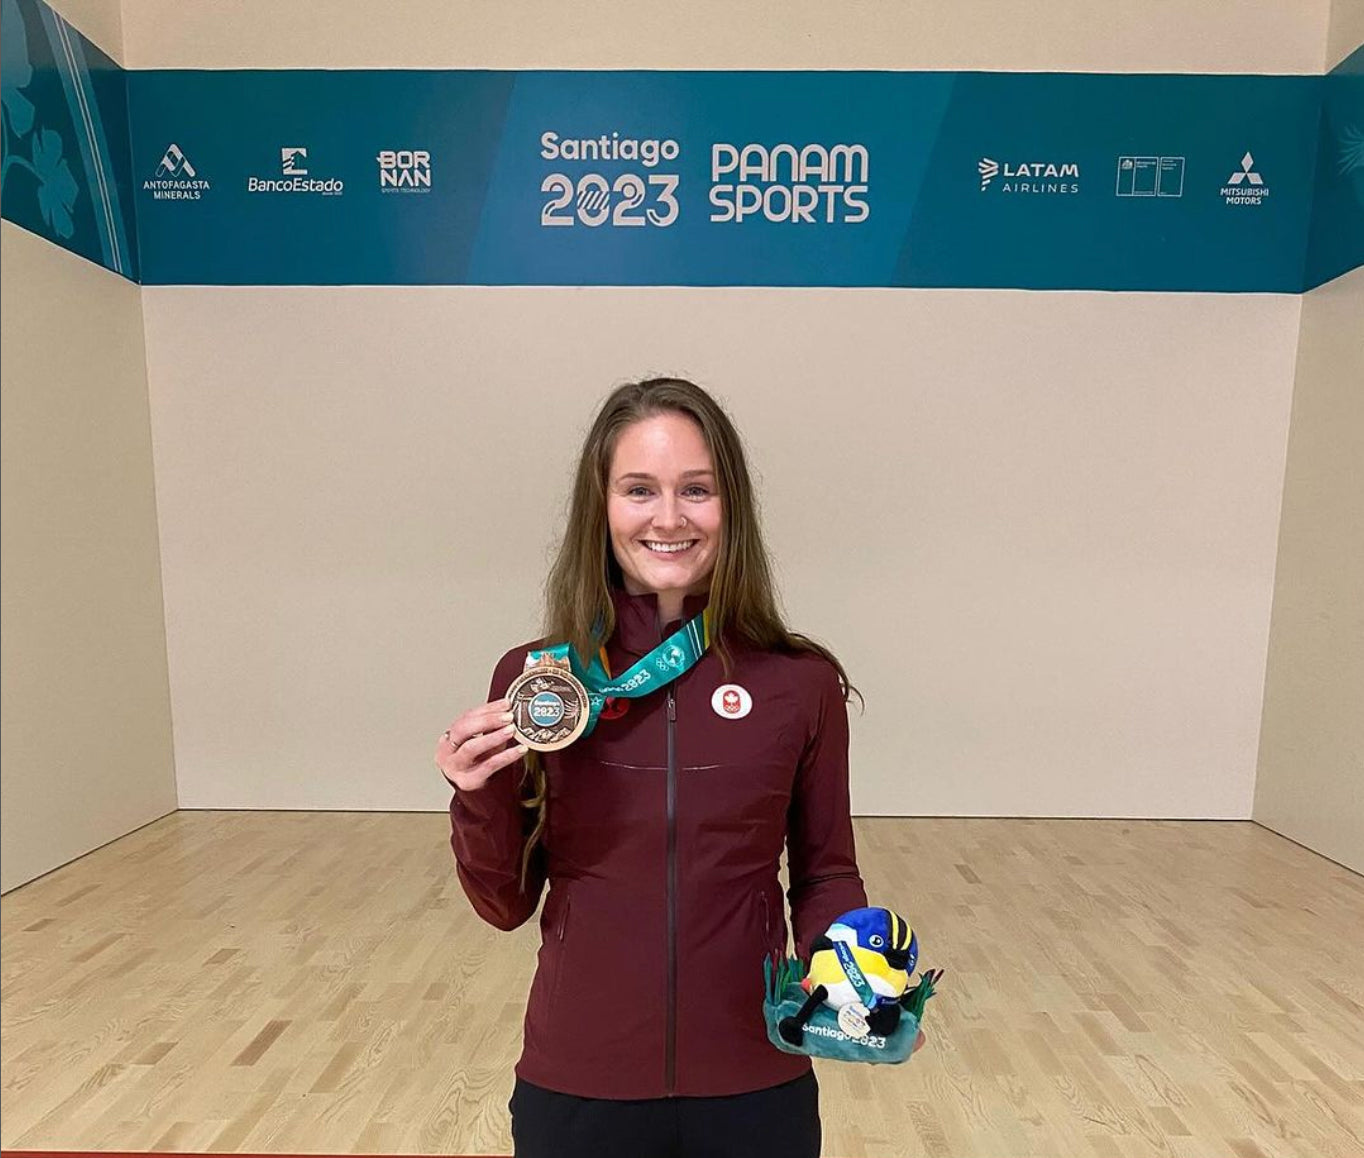 Hollie Naughton Triumphs at Pan American Games with Double Medal Win